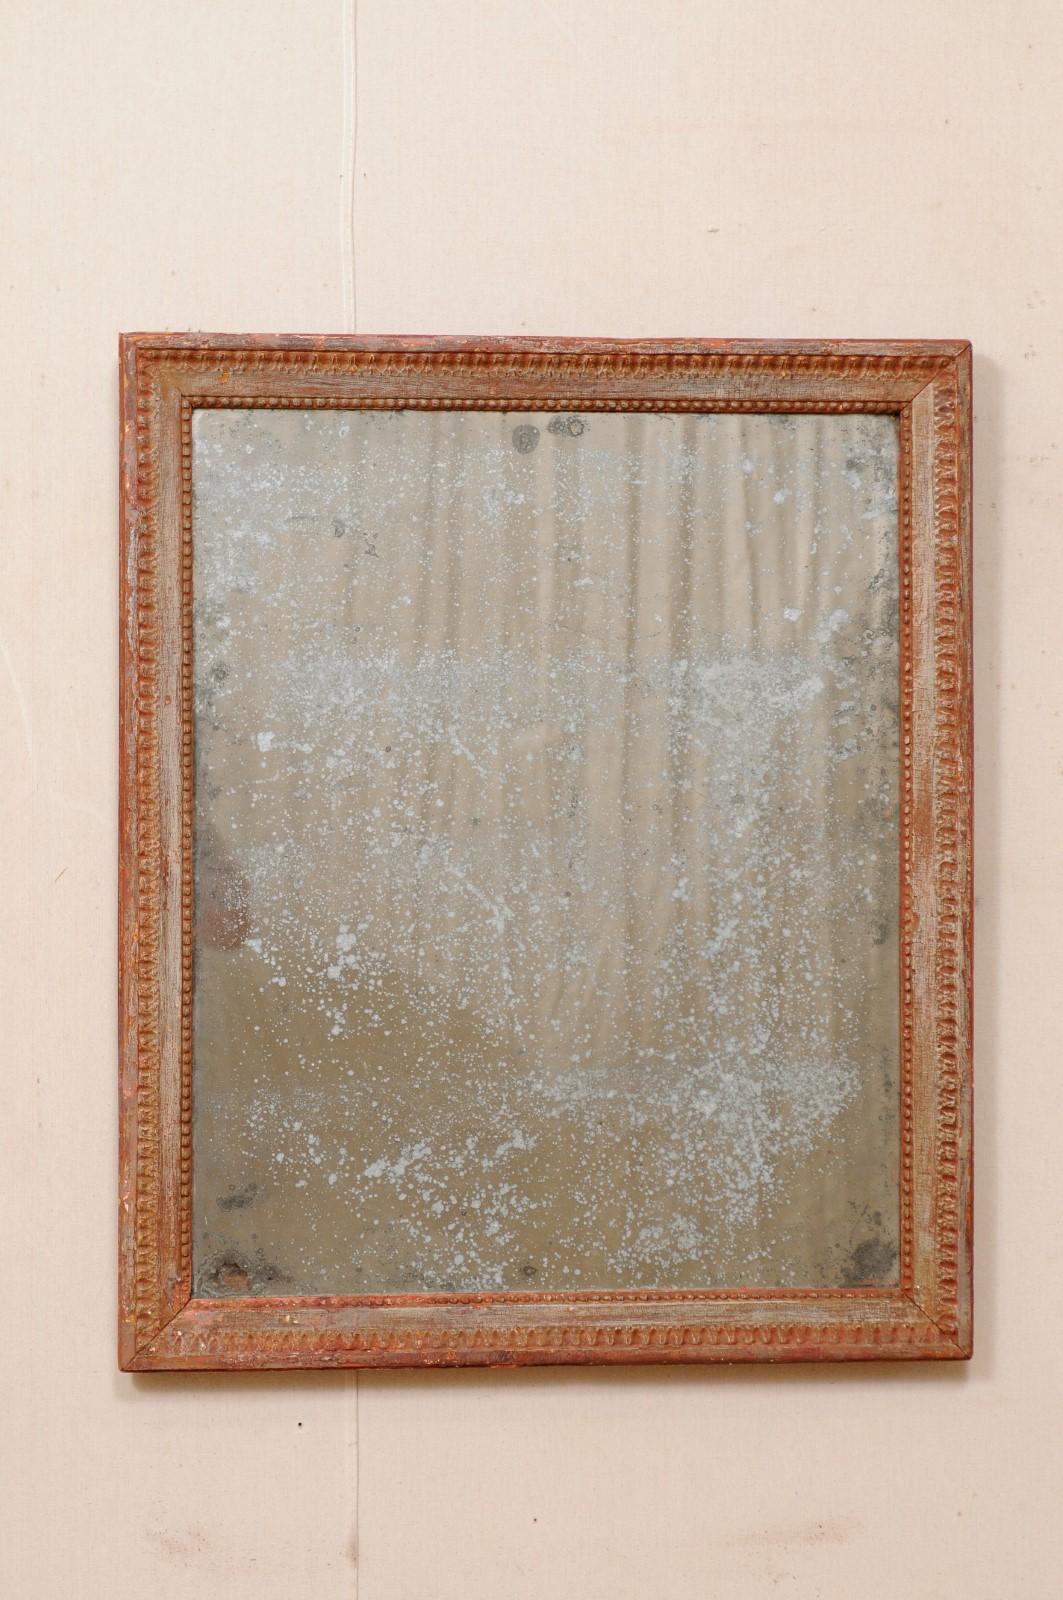 French Carved and Painted Wood Wall Mirror, Early 19th Century For Sale 7